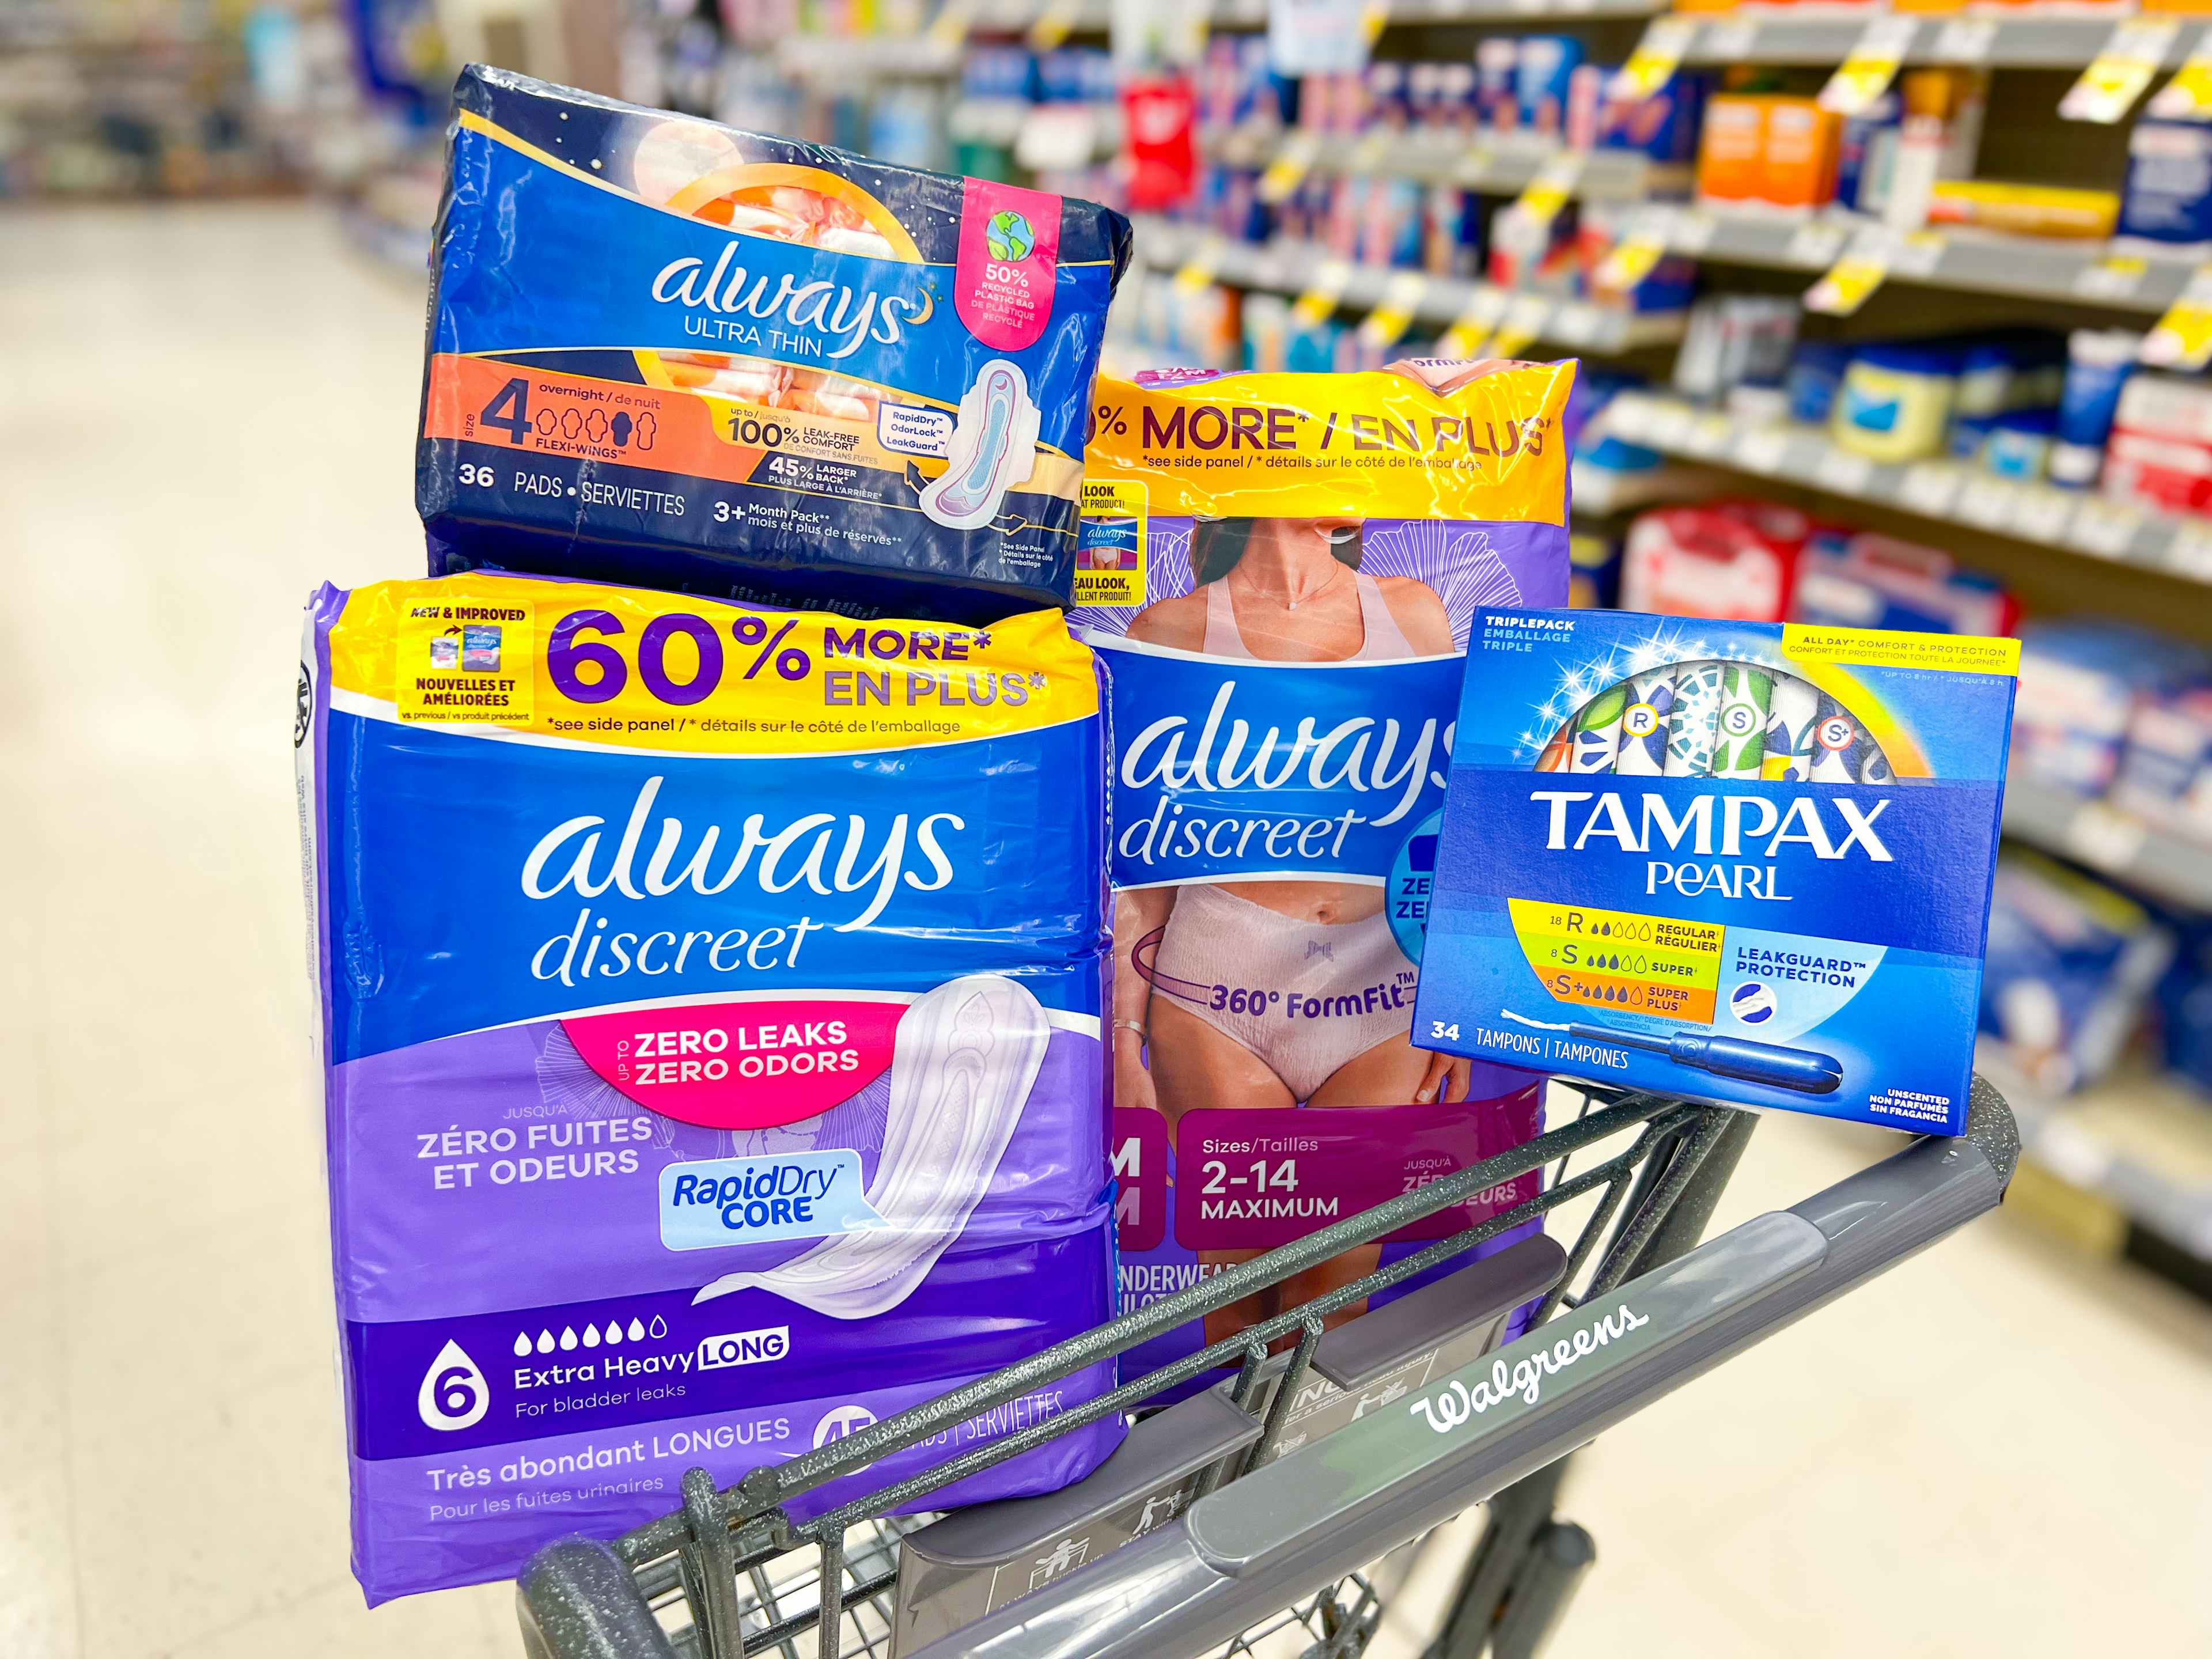 walgreens always tampax products74